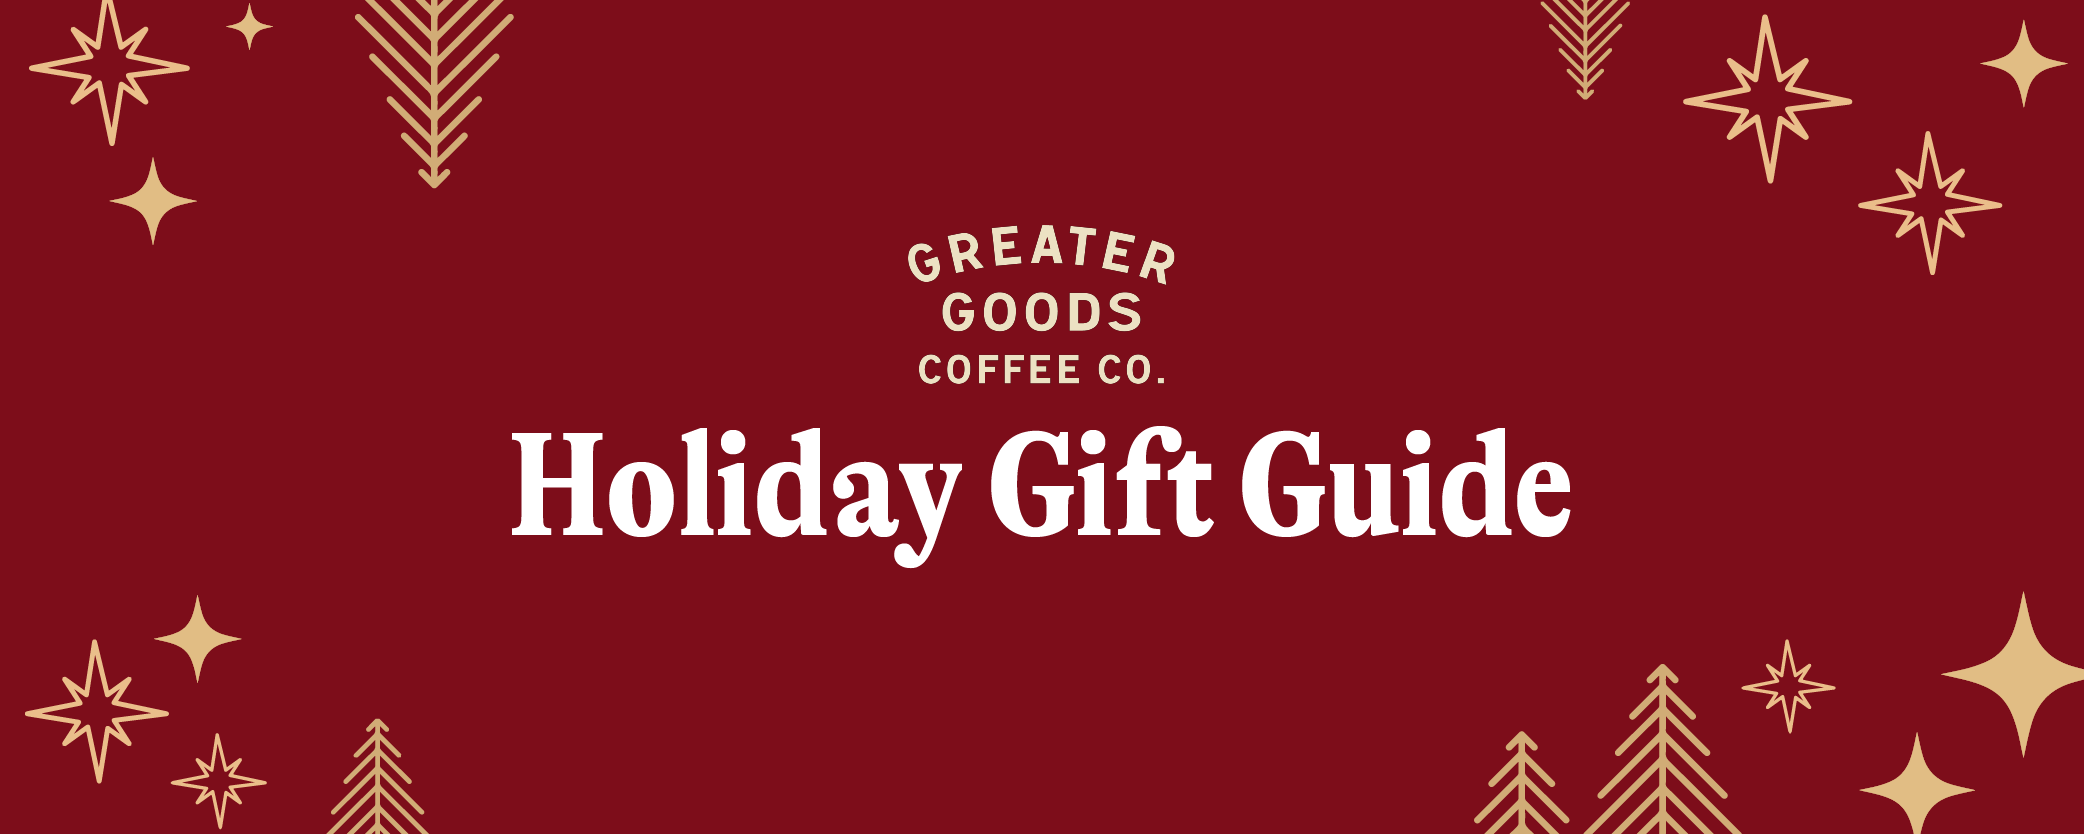 Greater Goods Gift Guide